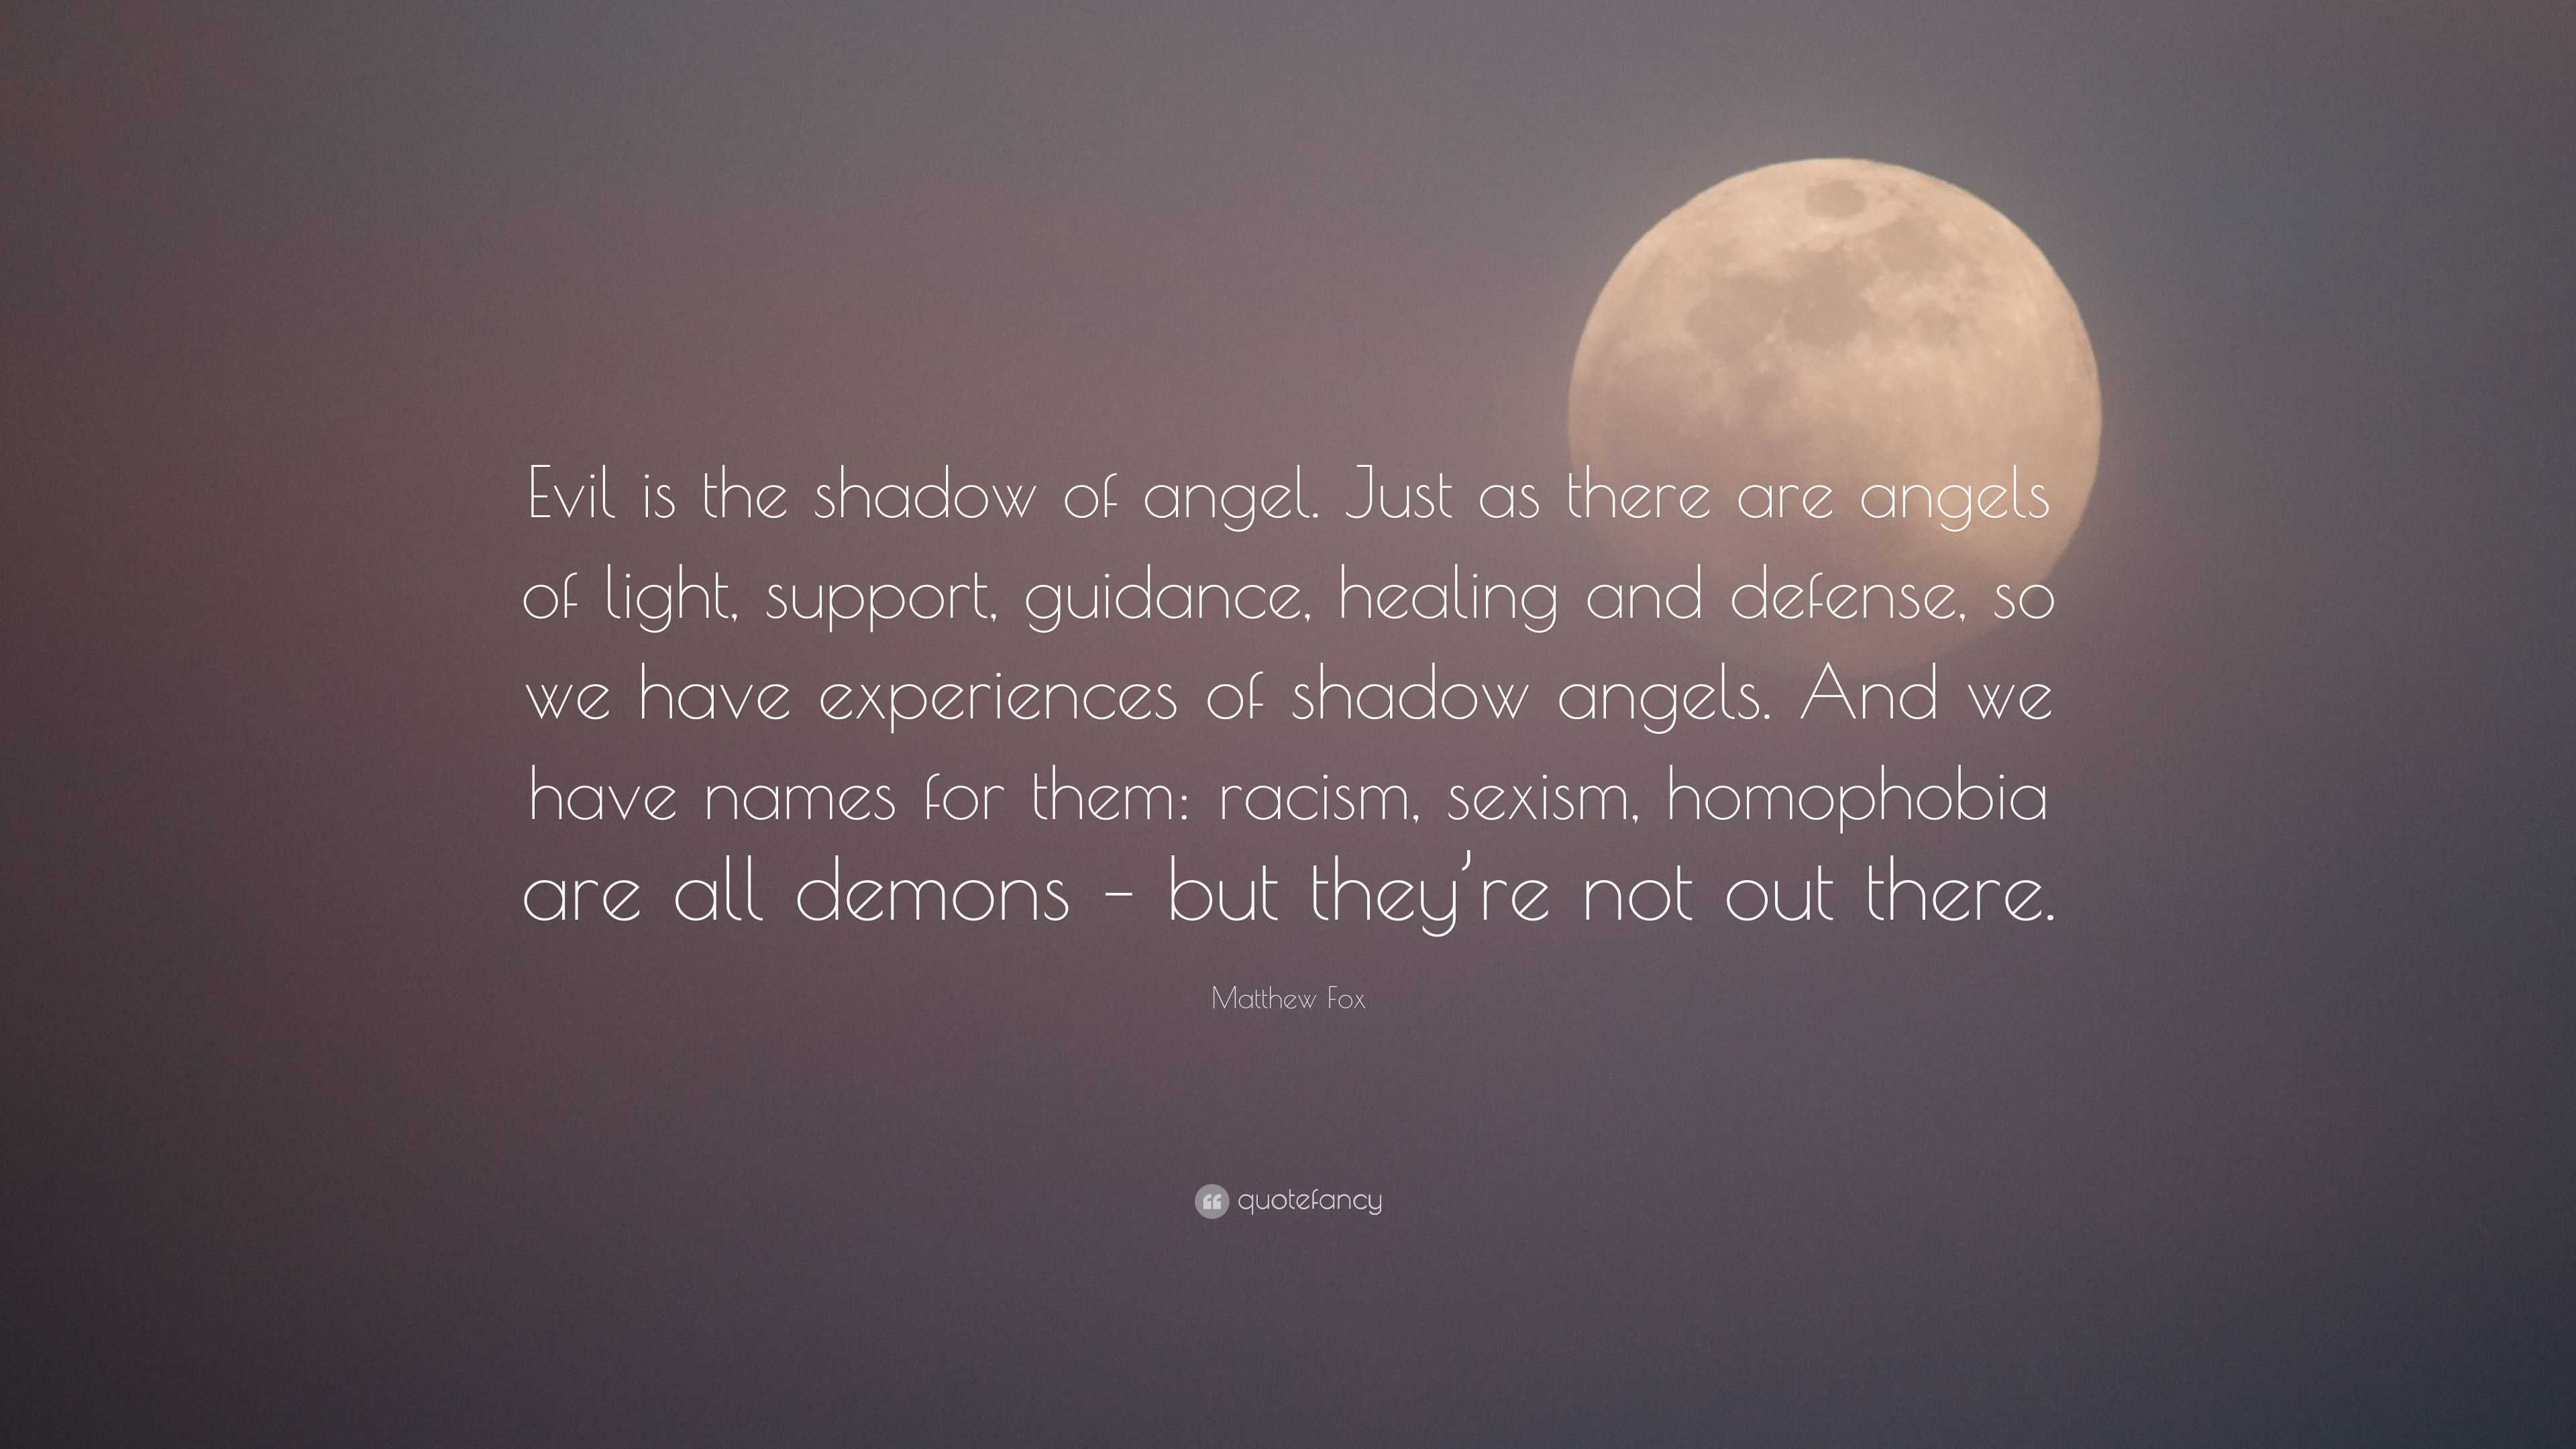 healing angel quotes